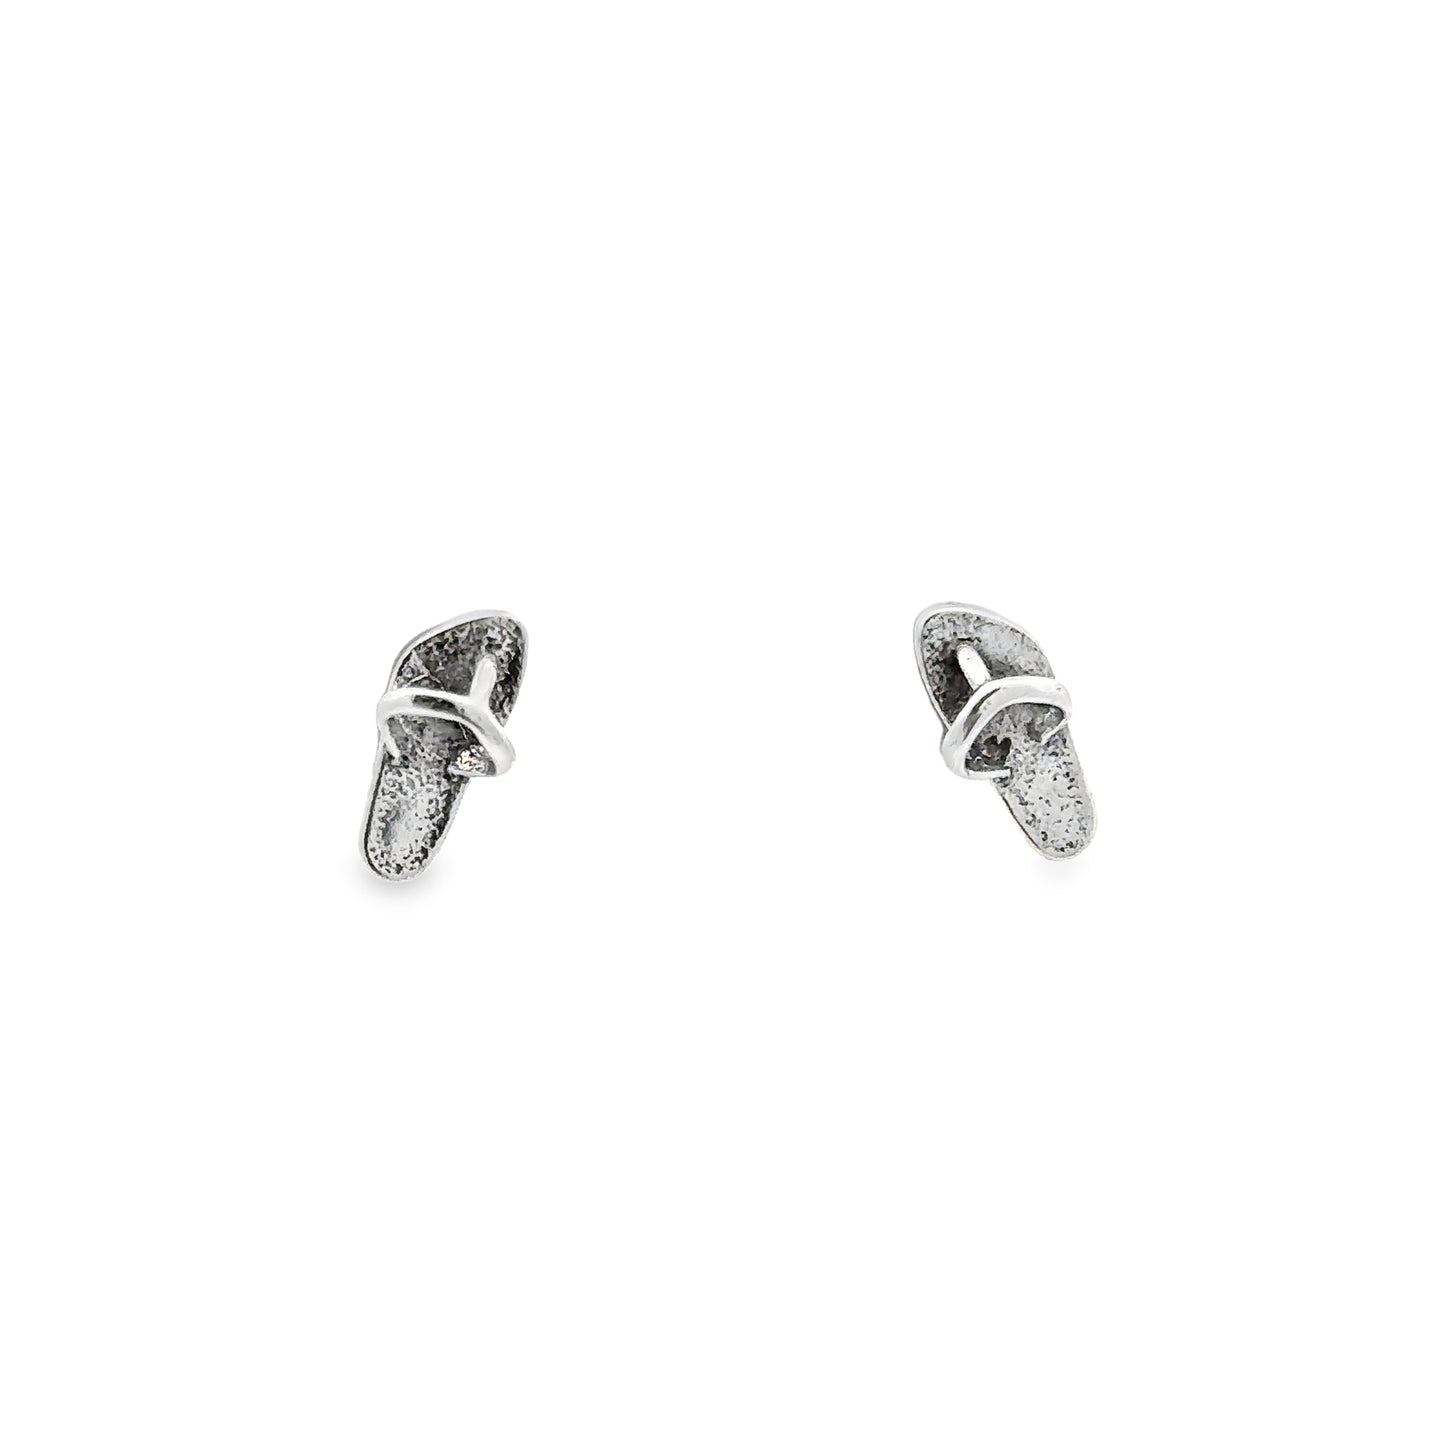 Description: A pair of Sandal Studs on a white background.